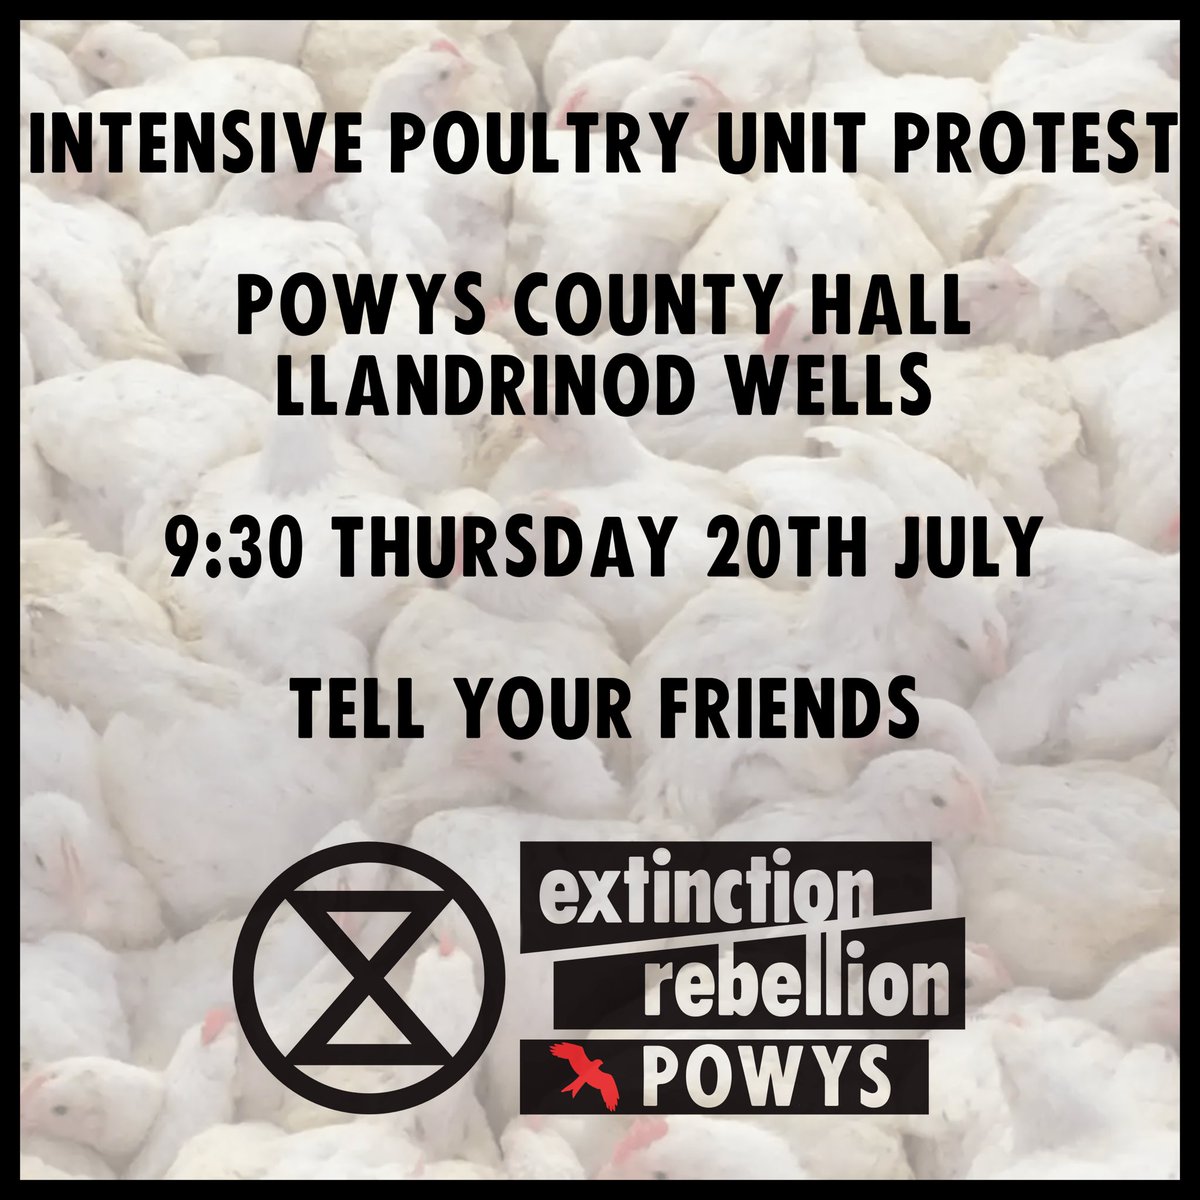 Protest at County Hall starting 9:30 on Thursday 20th! All concerned individuals and organisations are invited to stand with us to demand a stop to the harm caused by Intensive Poultry Units.